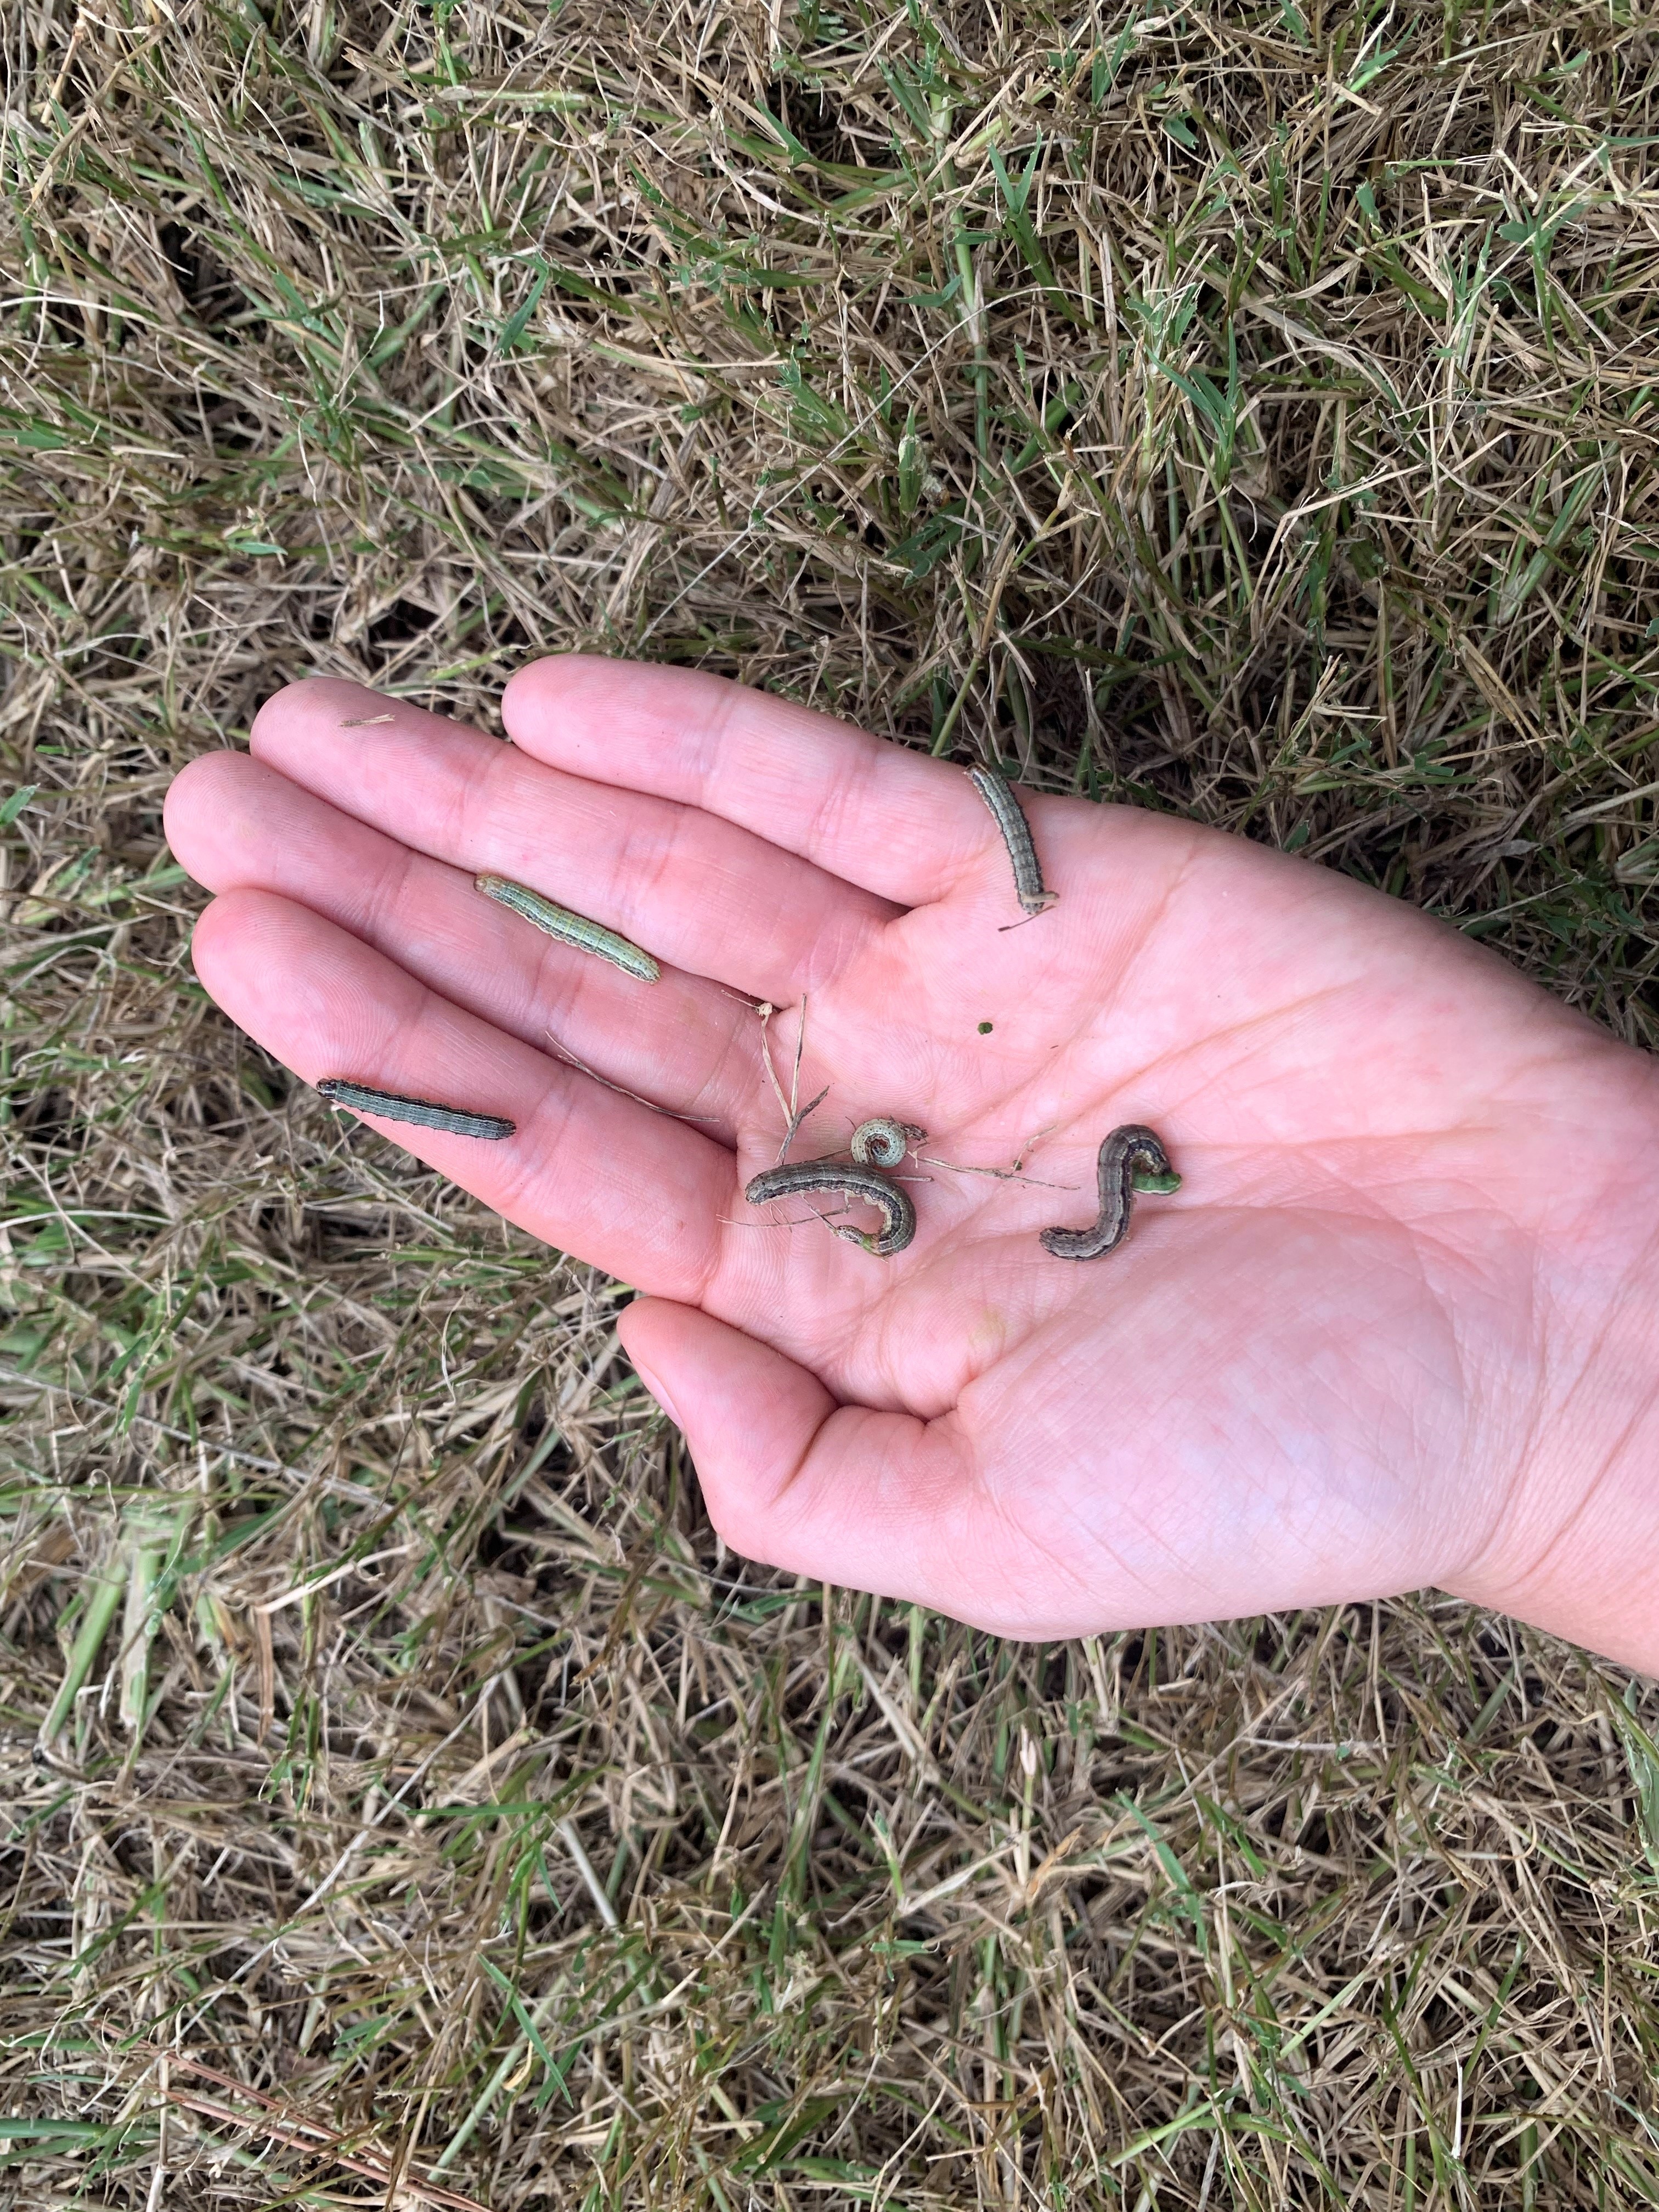 Your Lawn Is Gone? OSU's Tom Royer Helps Explain Oklahoma's Armyworm Infestation